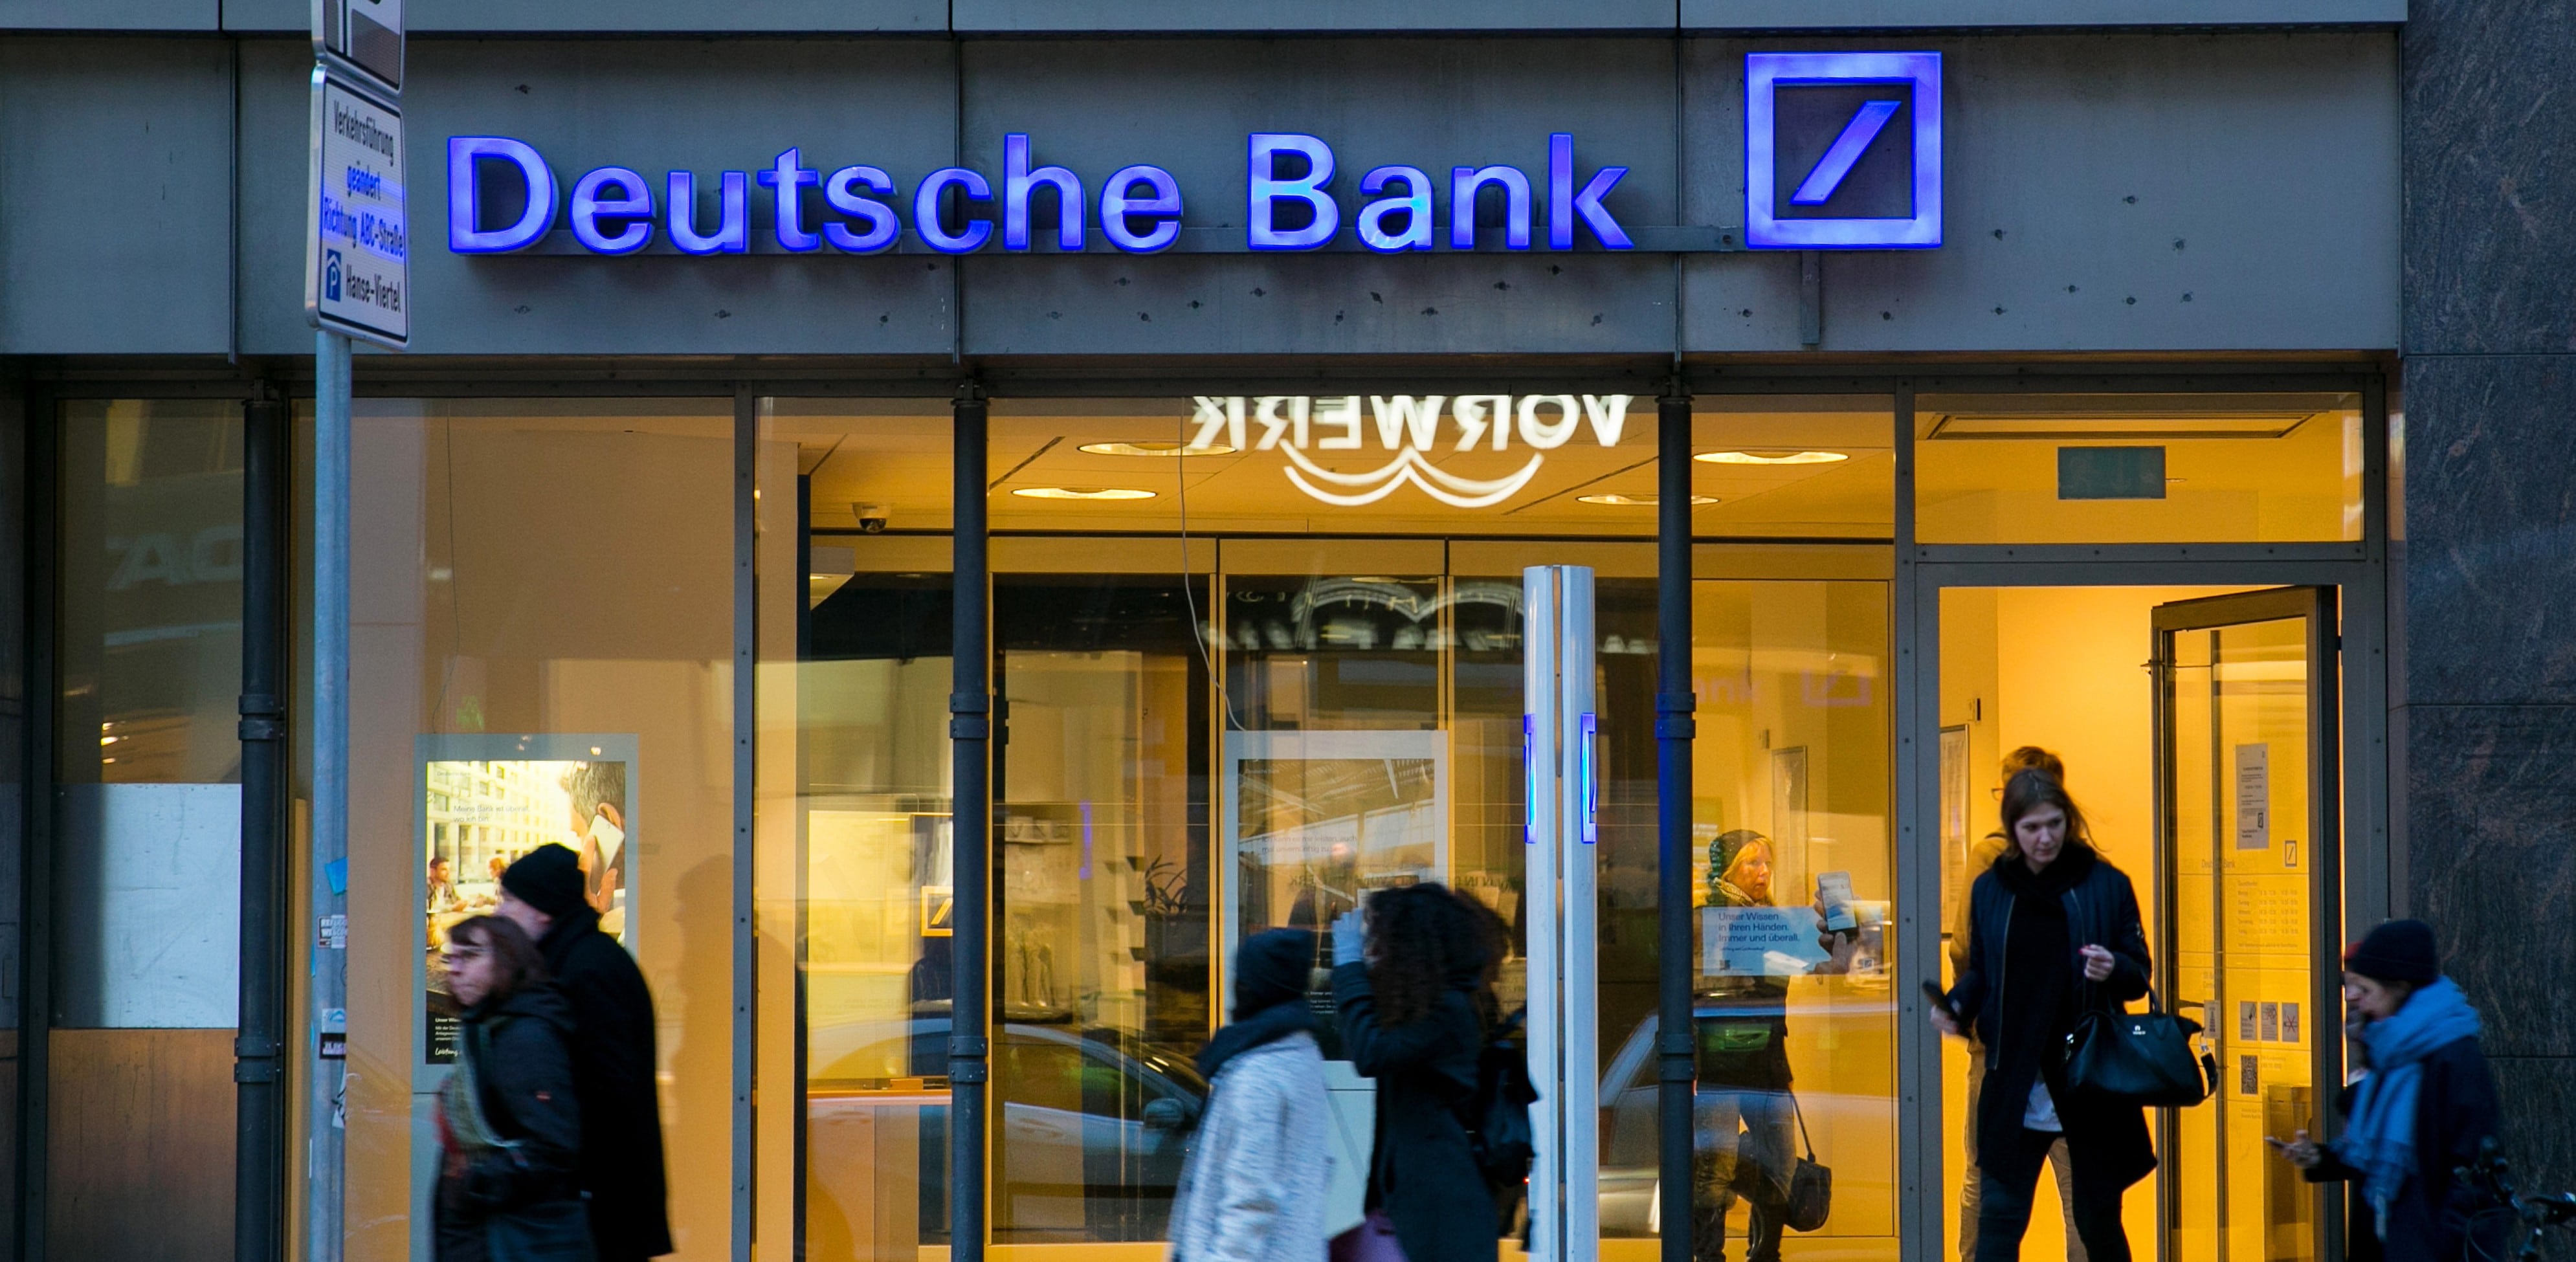 The $541 Million Loss that Became a Thorn in the Side of Deutsche Bank